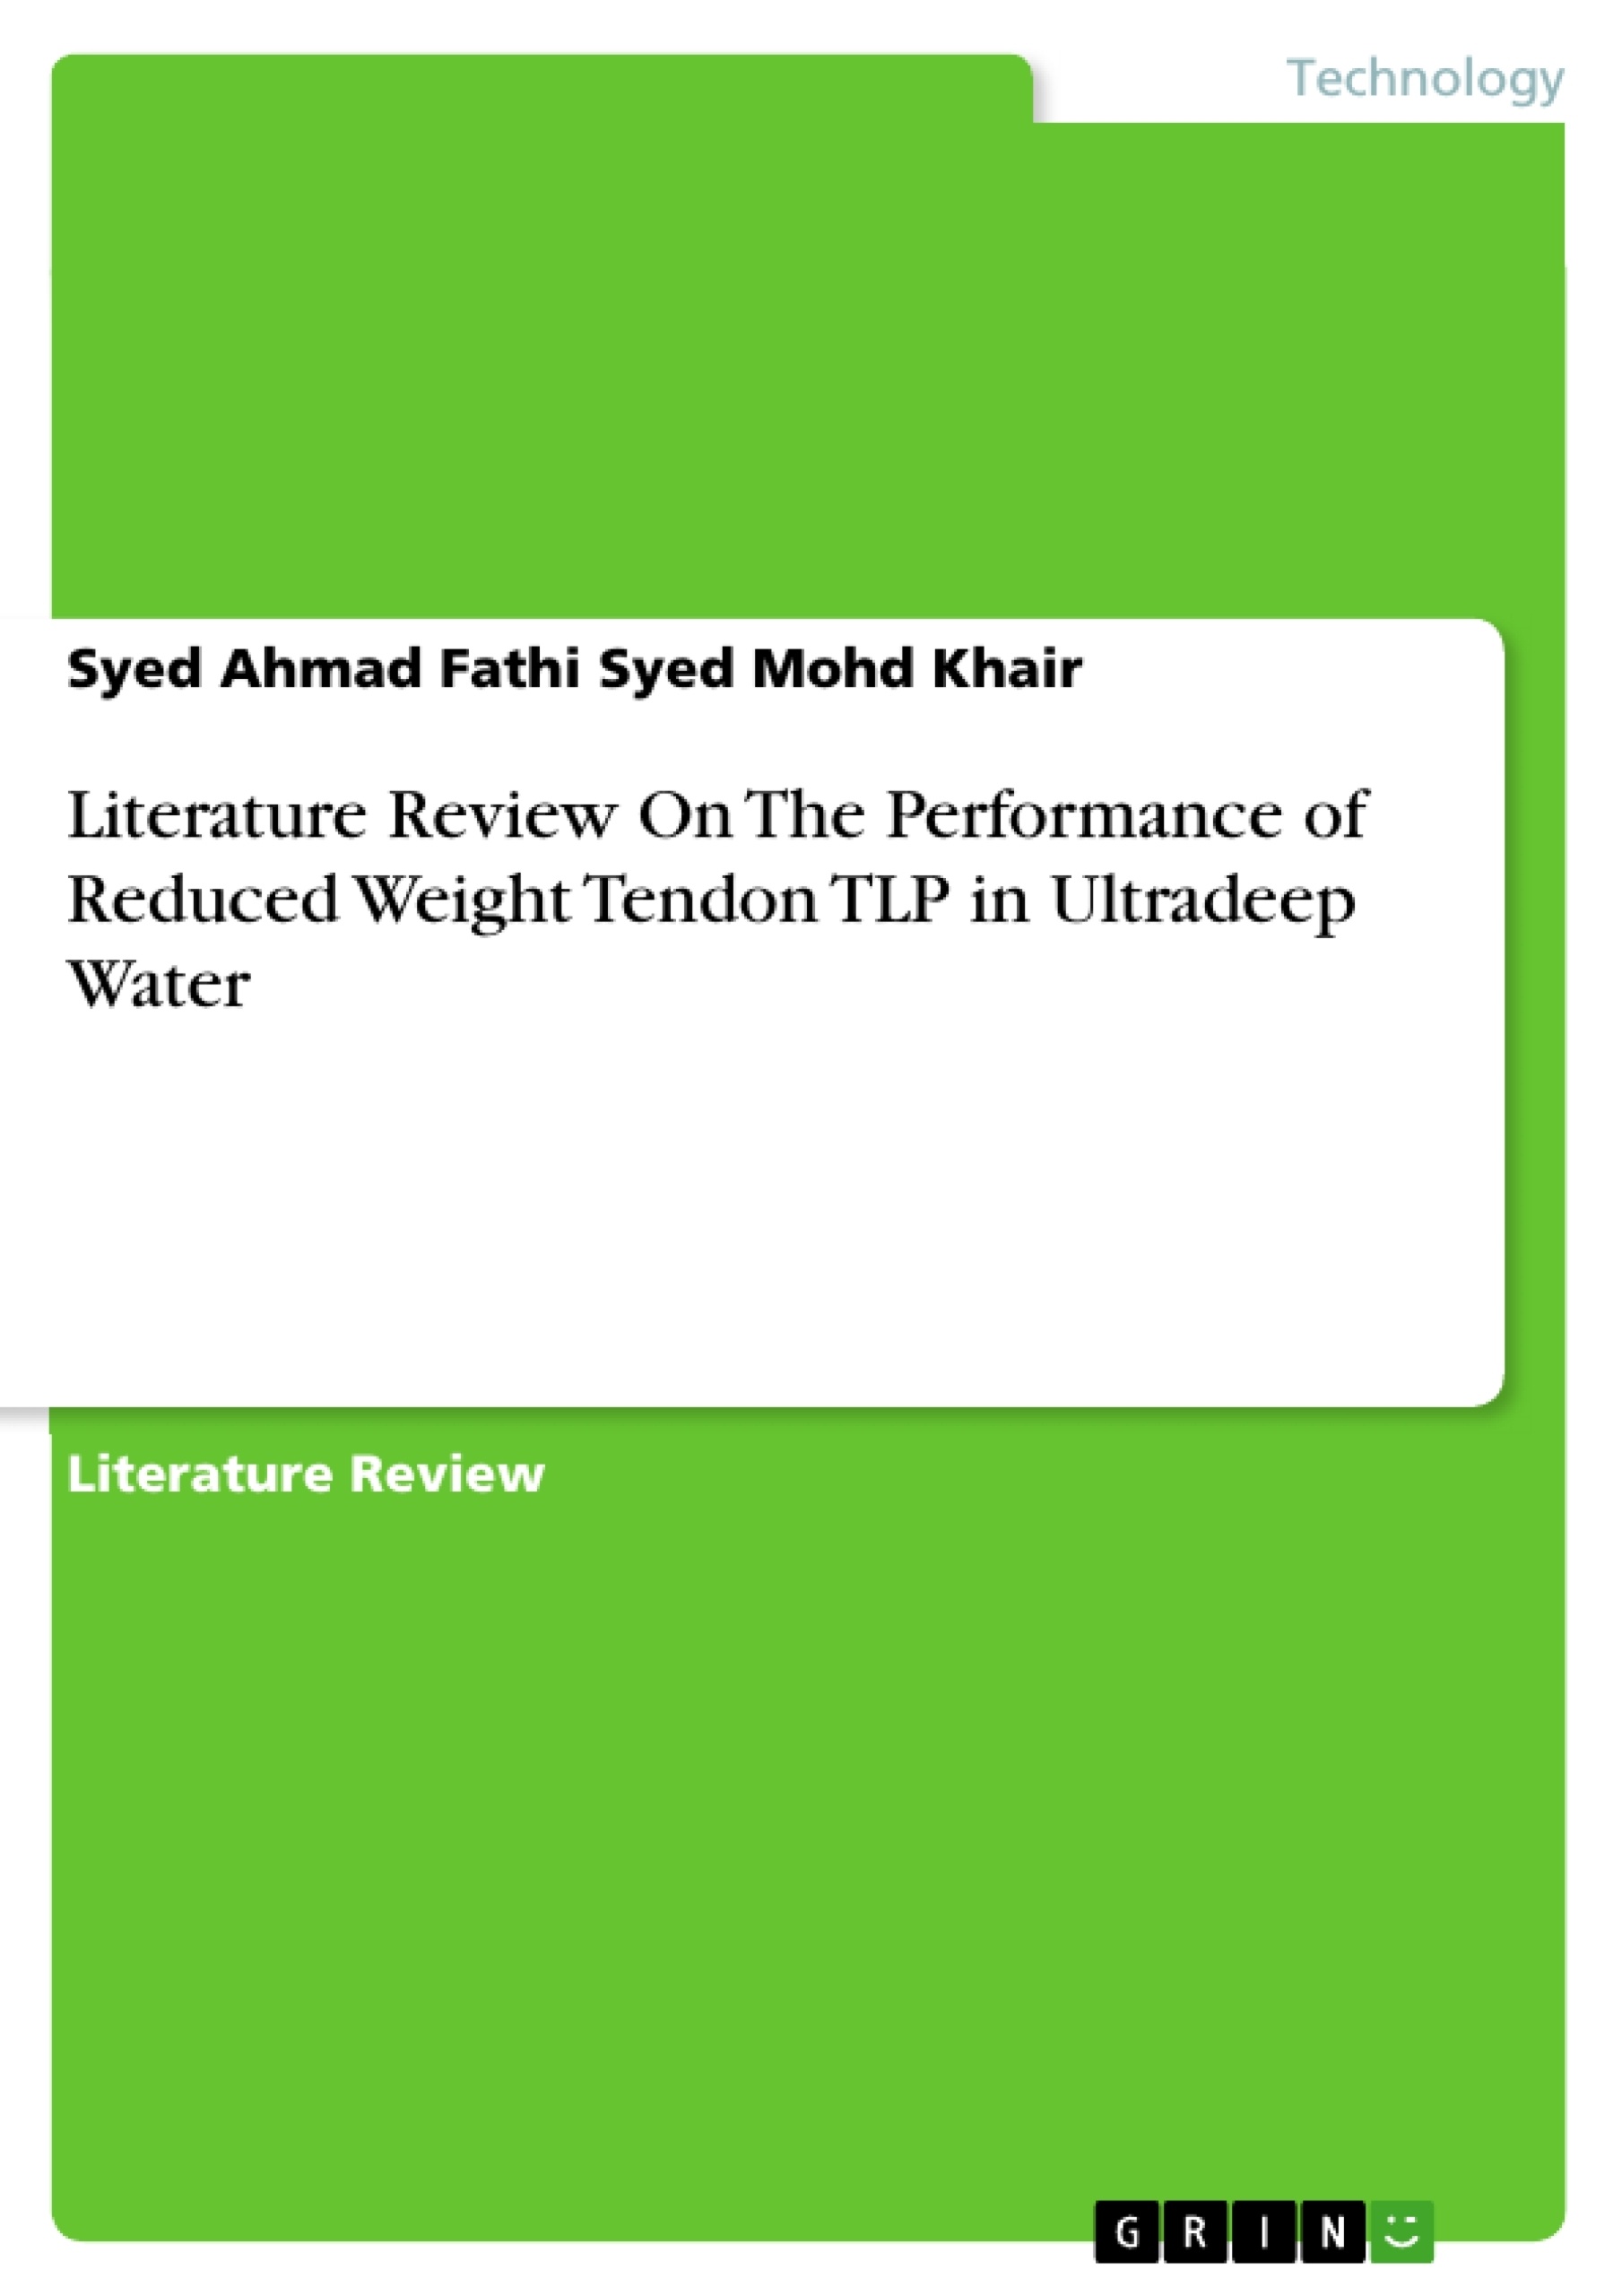 Title: Literature Review On The Performance of Reduced Weight Tendon TLP in Ultradeep Water